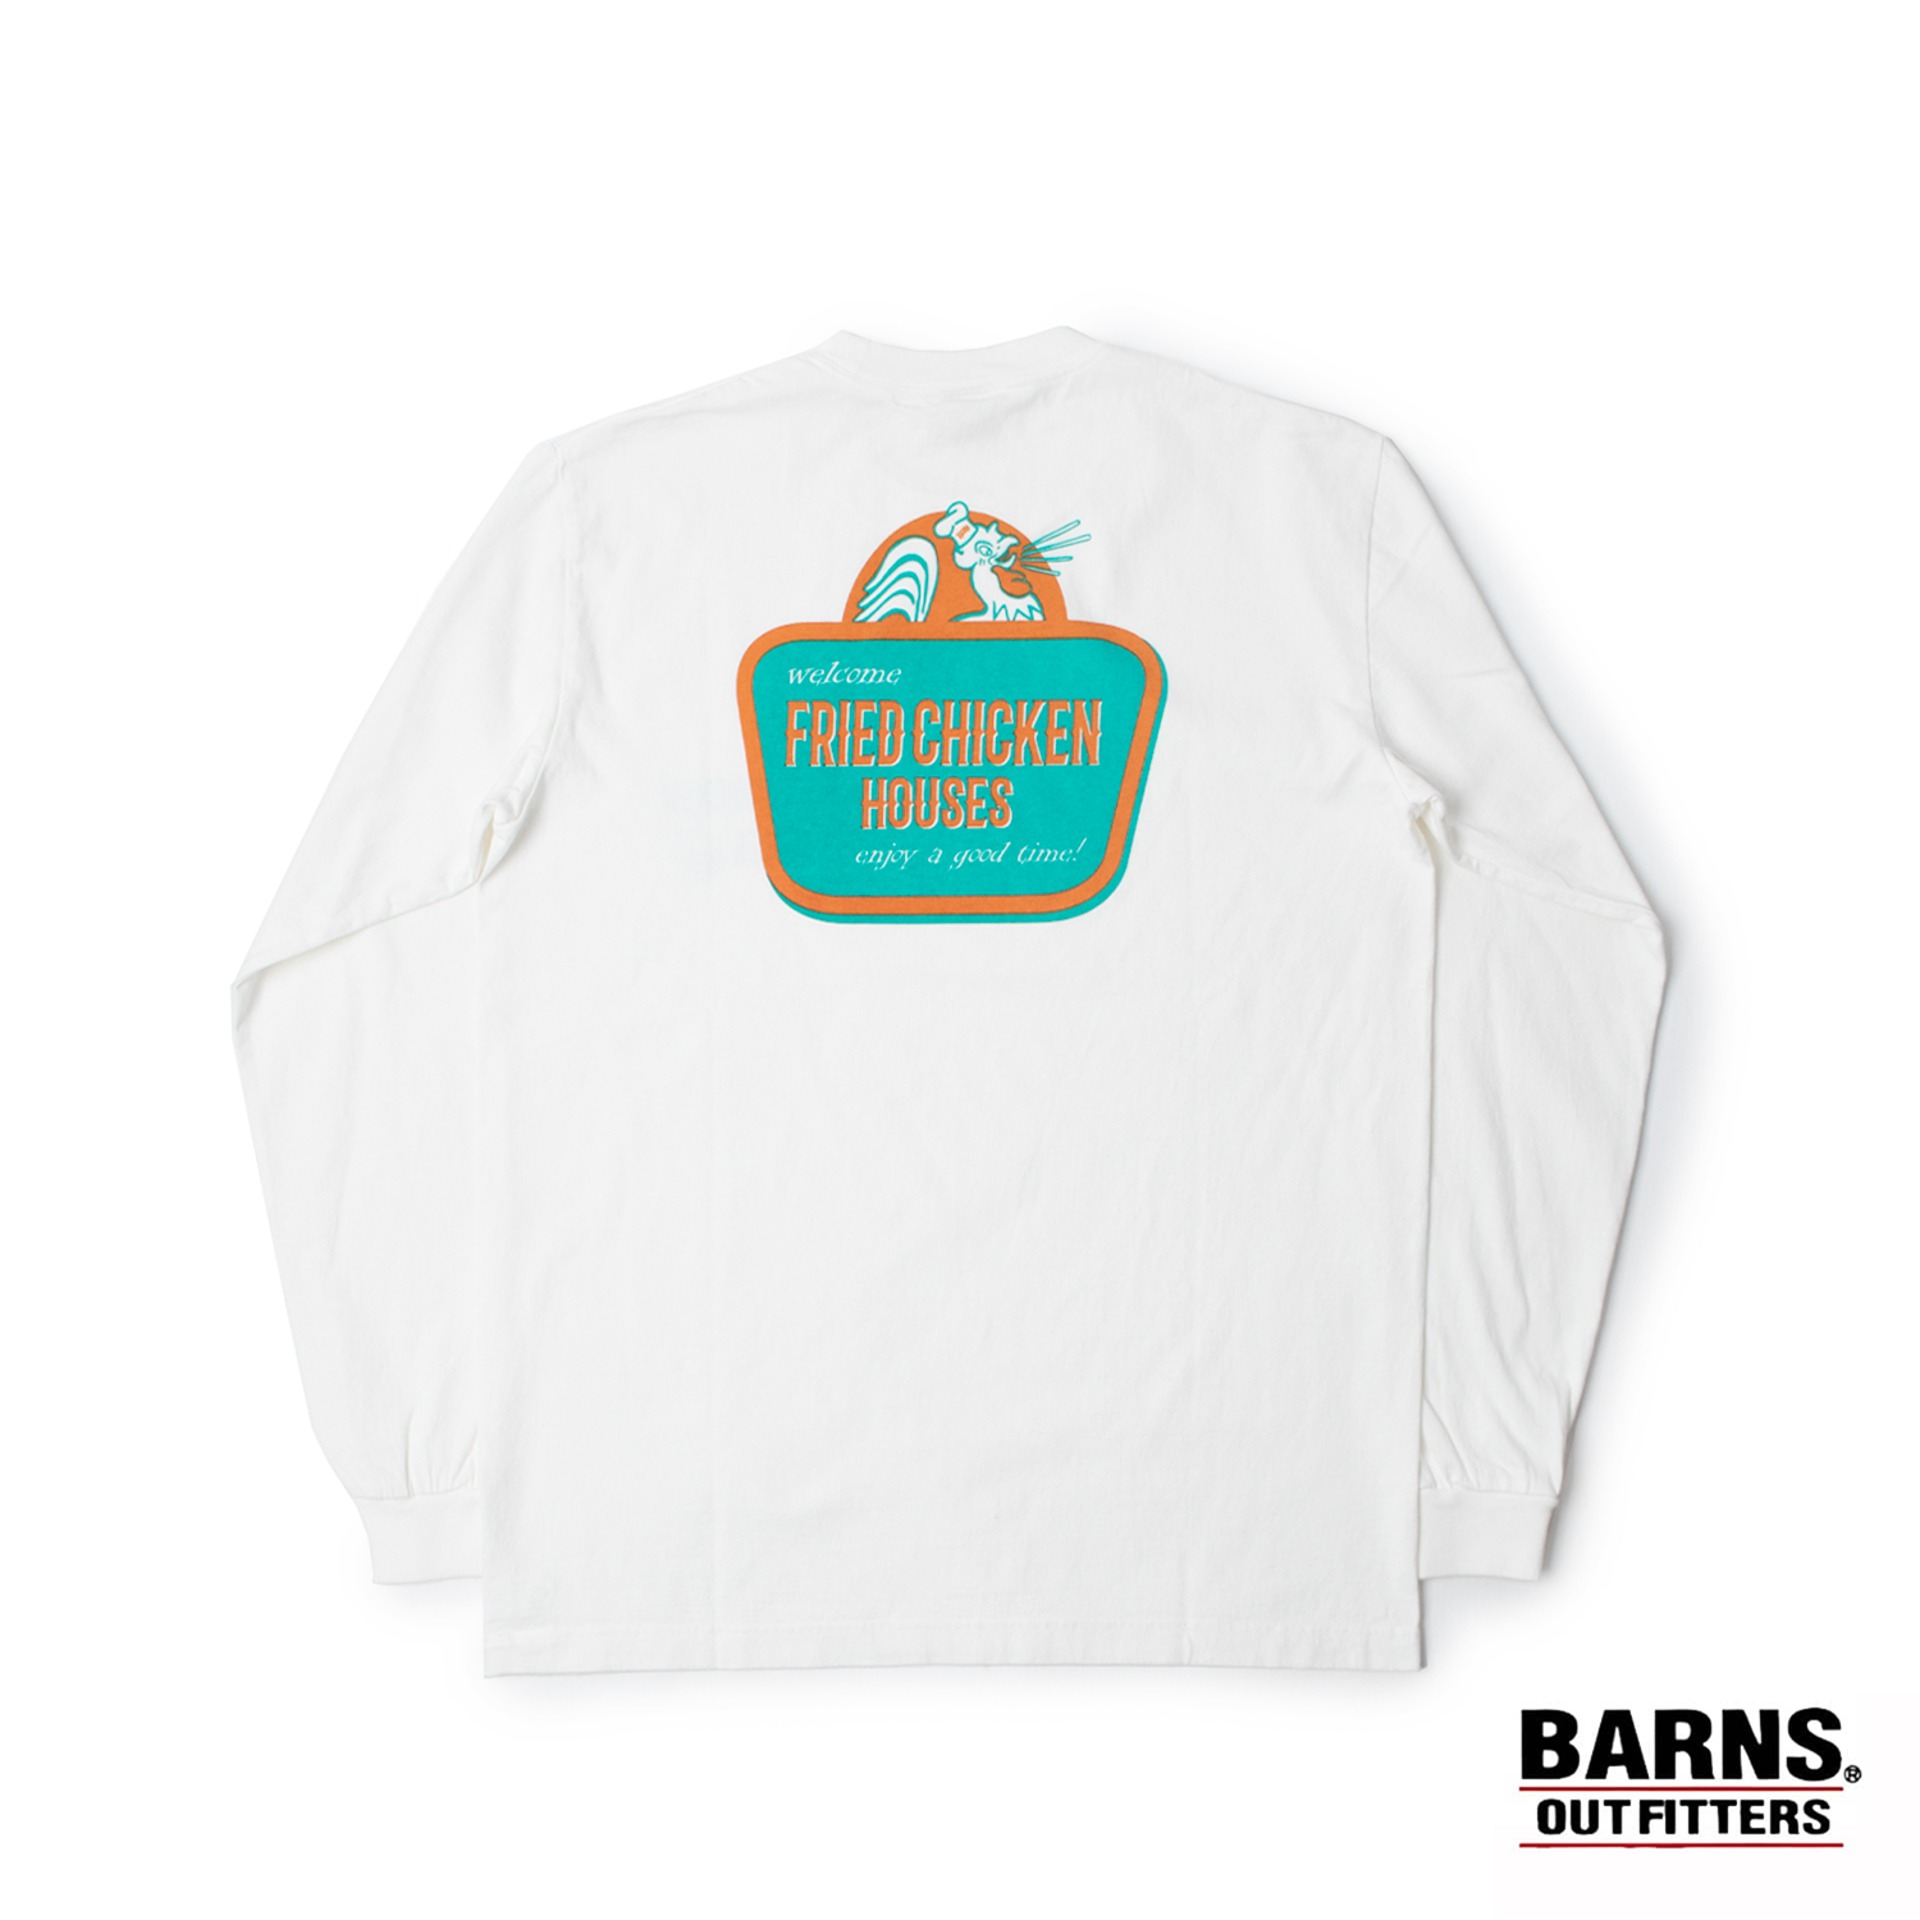 VINTAGE LIKE L/S PT-T SHIRT FRIED CHICKEN HOUSE (White)